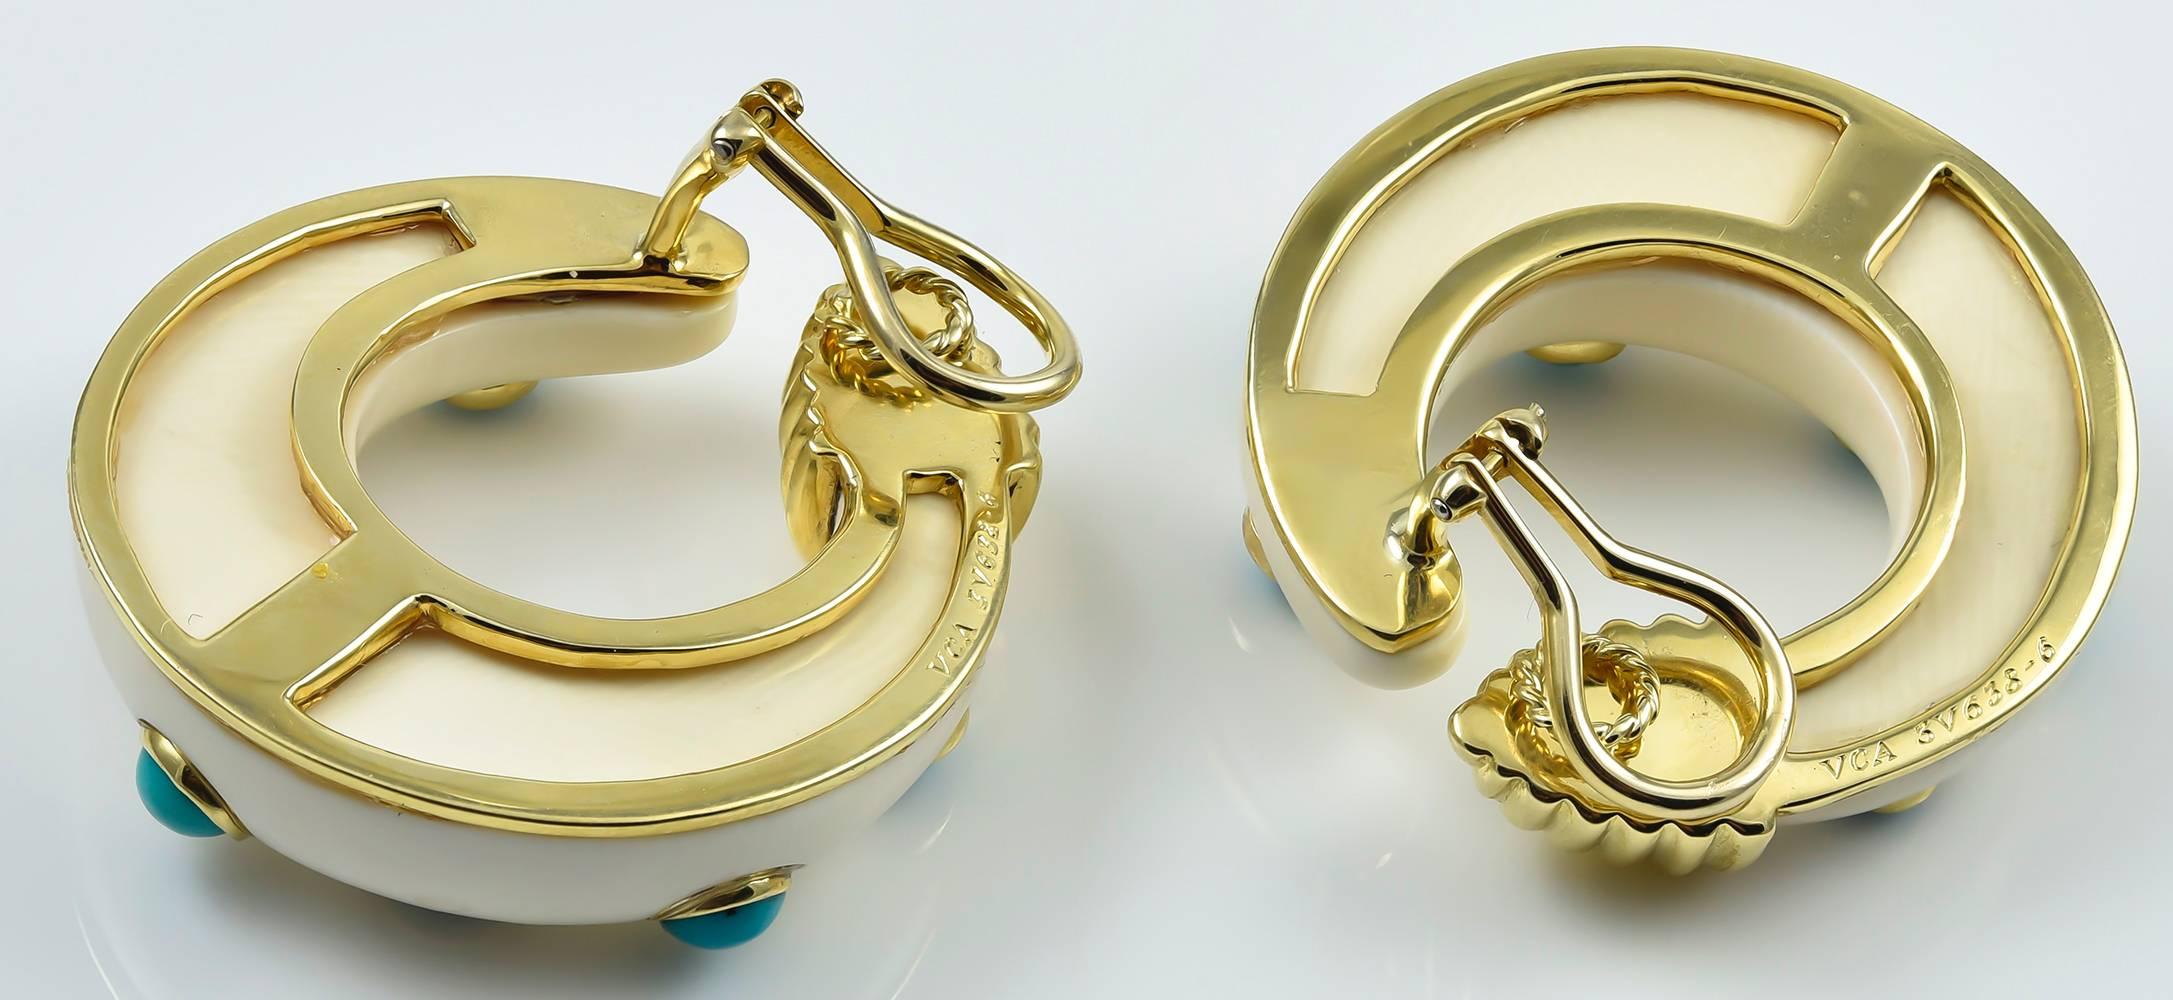 Creole hoop earclips designed as polished yellow gold beehive motifs clipped to the ear, extending sweeping arcs of white hard stone studded with turquoise cabochons set in gold bezels, signed VCA for Van Cleef & Arpels New York, numbered 3V638-6,